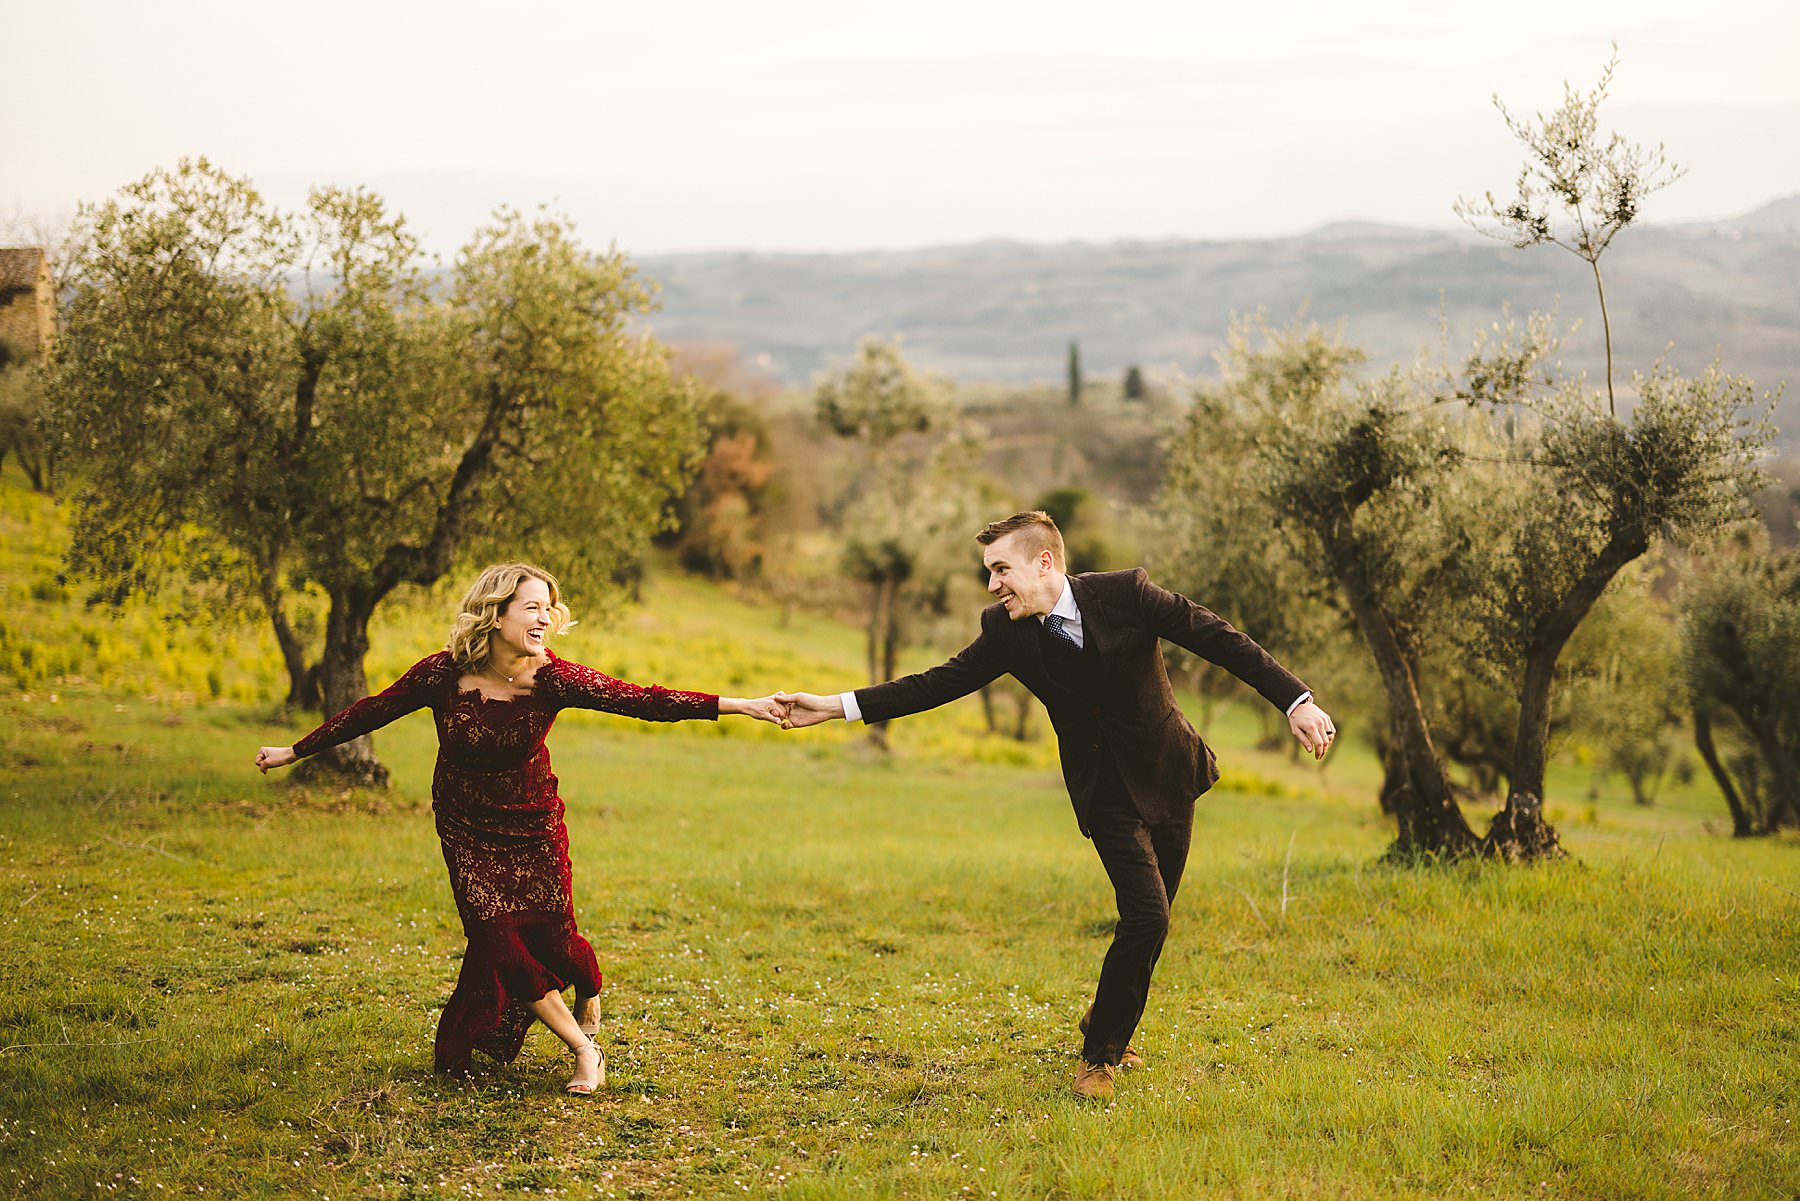 Enthusiastic wedding anniversary candid couple photo shoot in Chianti rolling hills